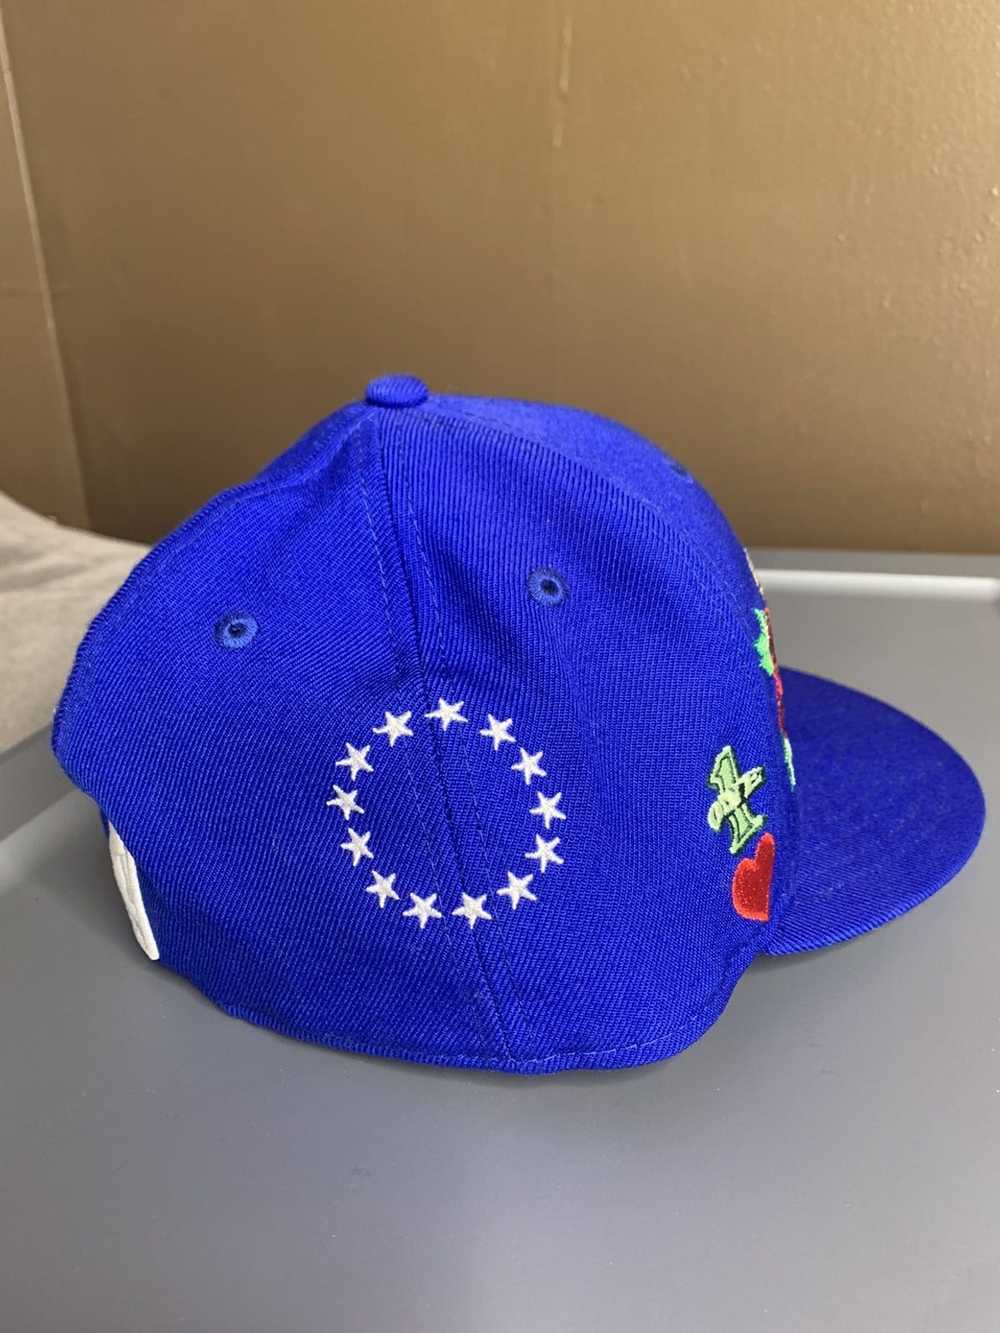 New Era 76ers New era Fitted hat - image 2